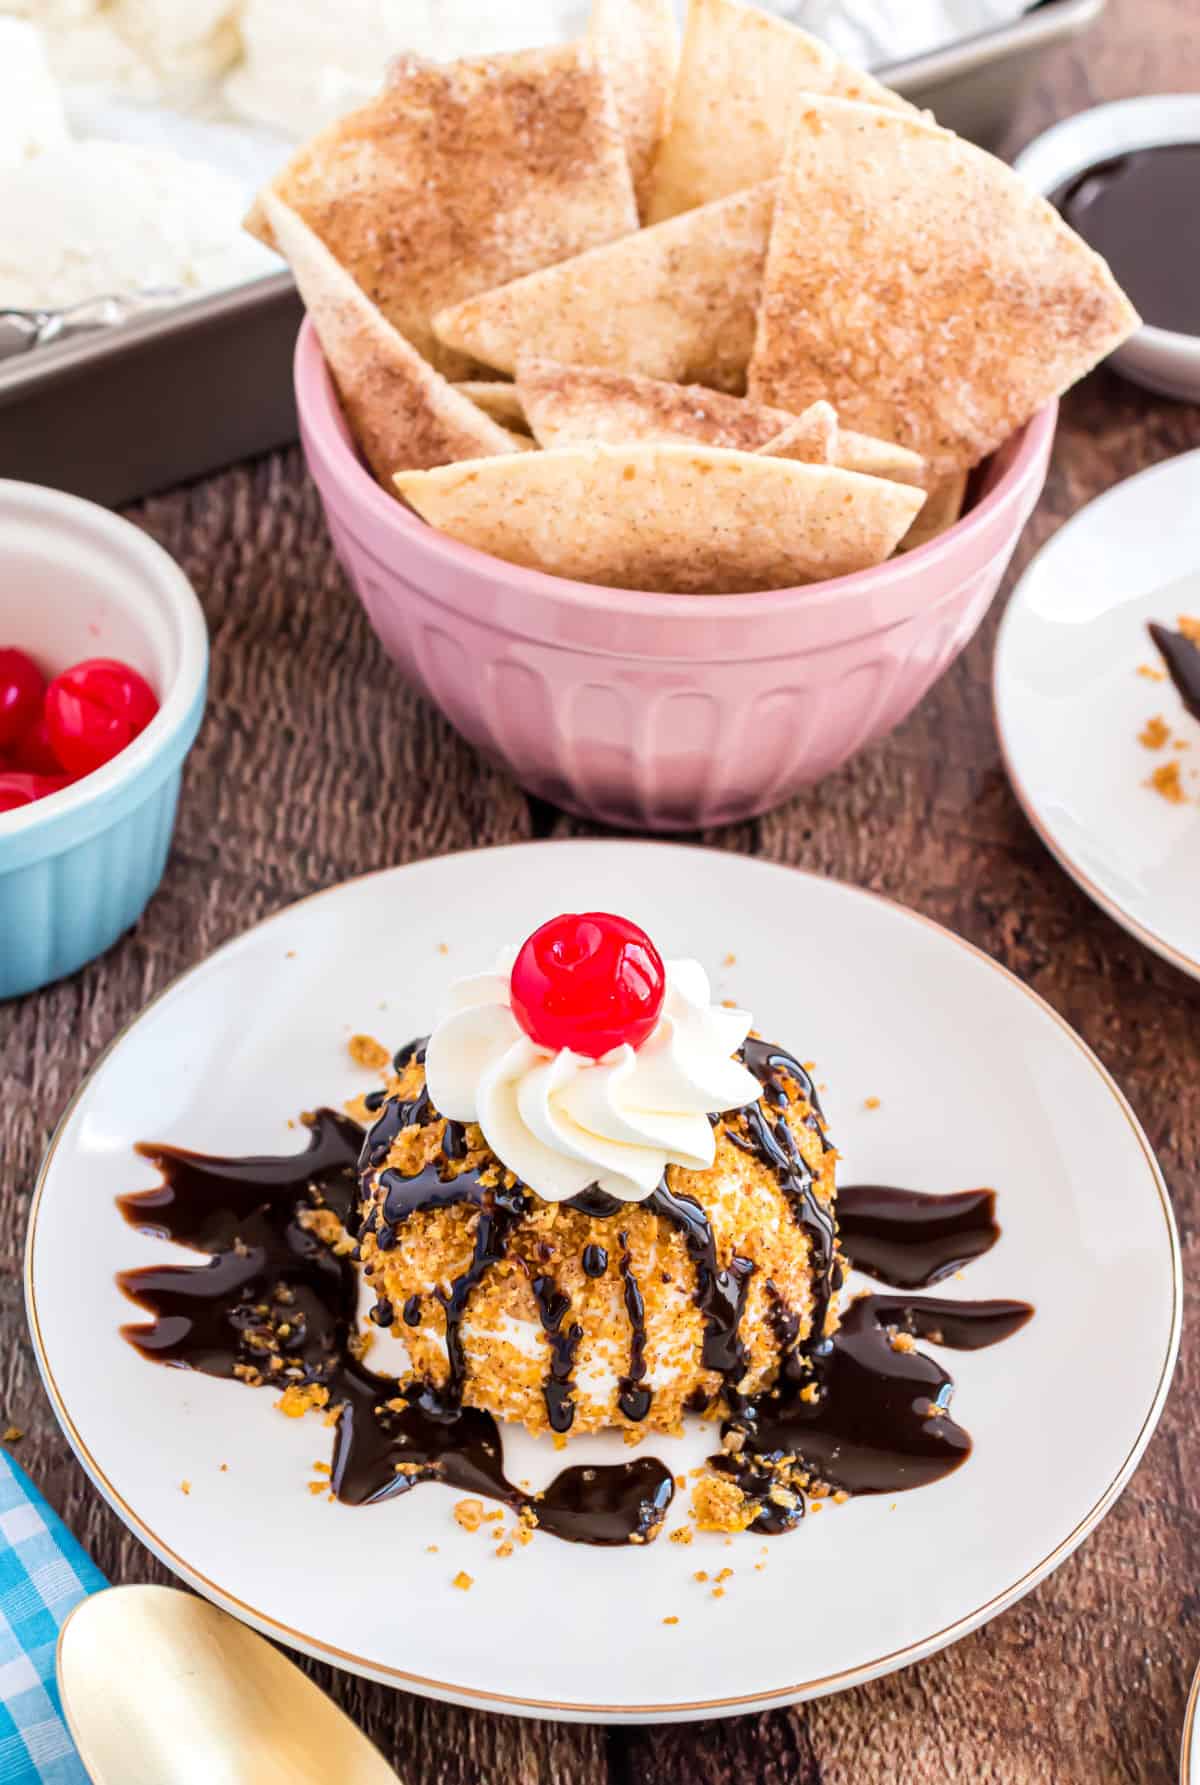 Fried ice cream served on a white plate with a side of cinnamon tortilla chips.